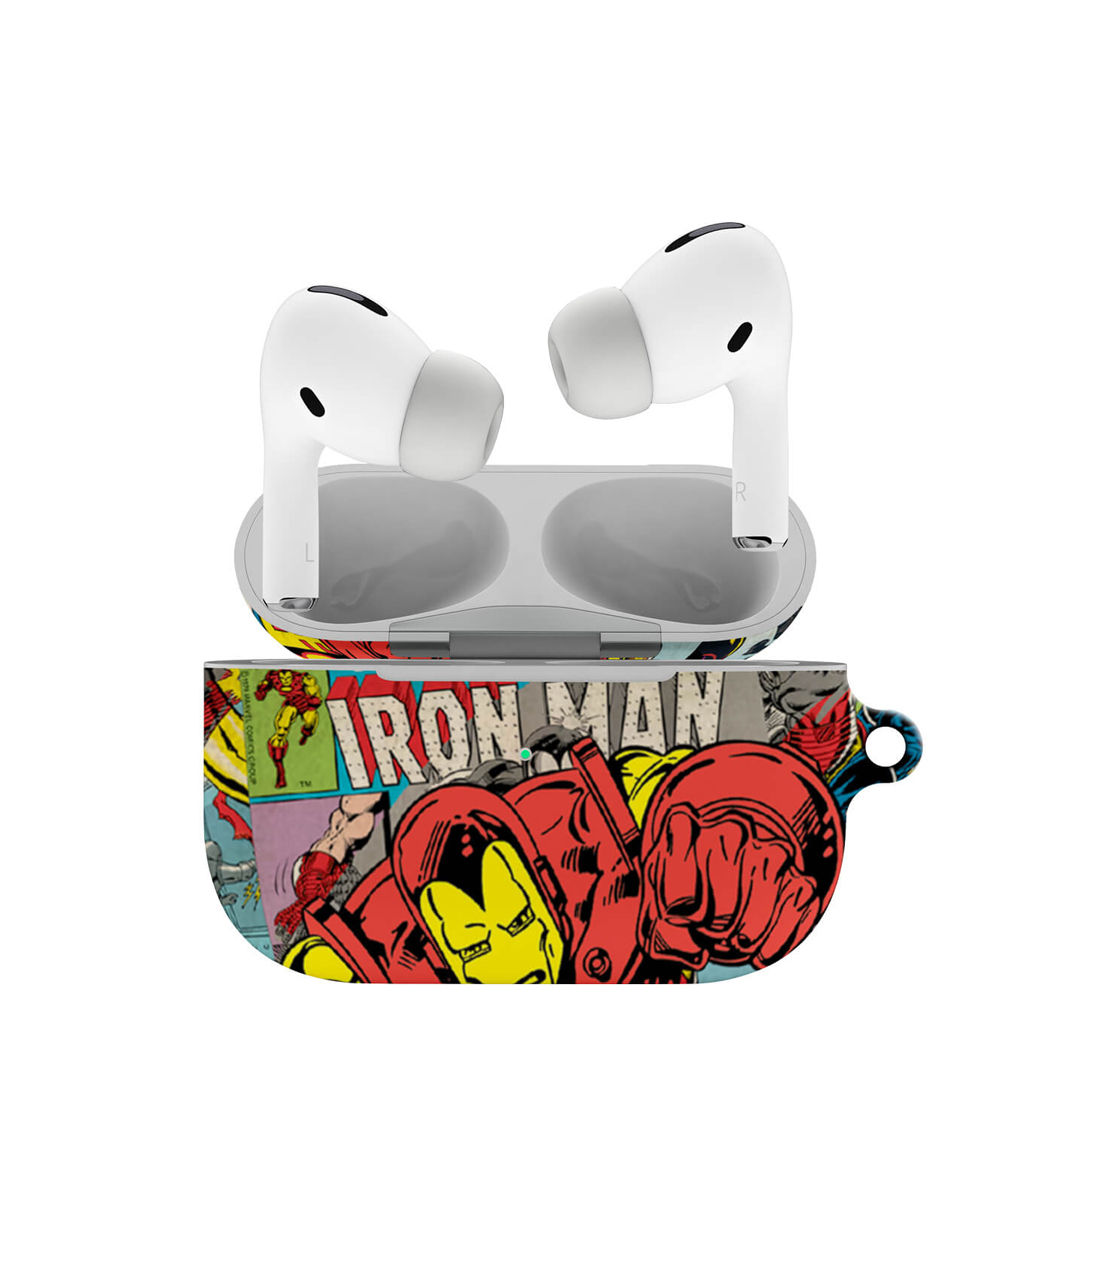 Buy Comic Ironman - Hard Shell Airpod Pro Case Airpod Cases Online